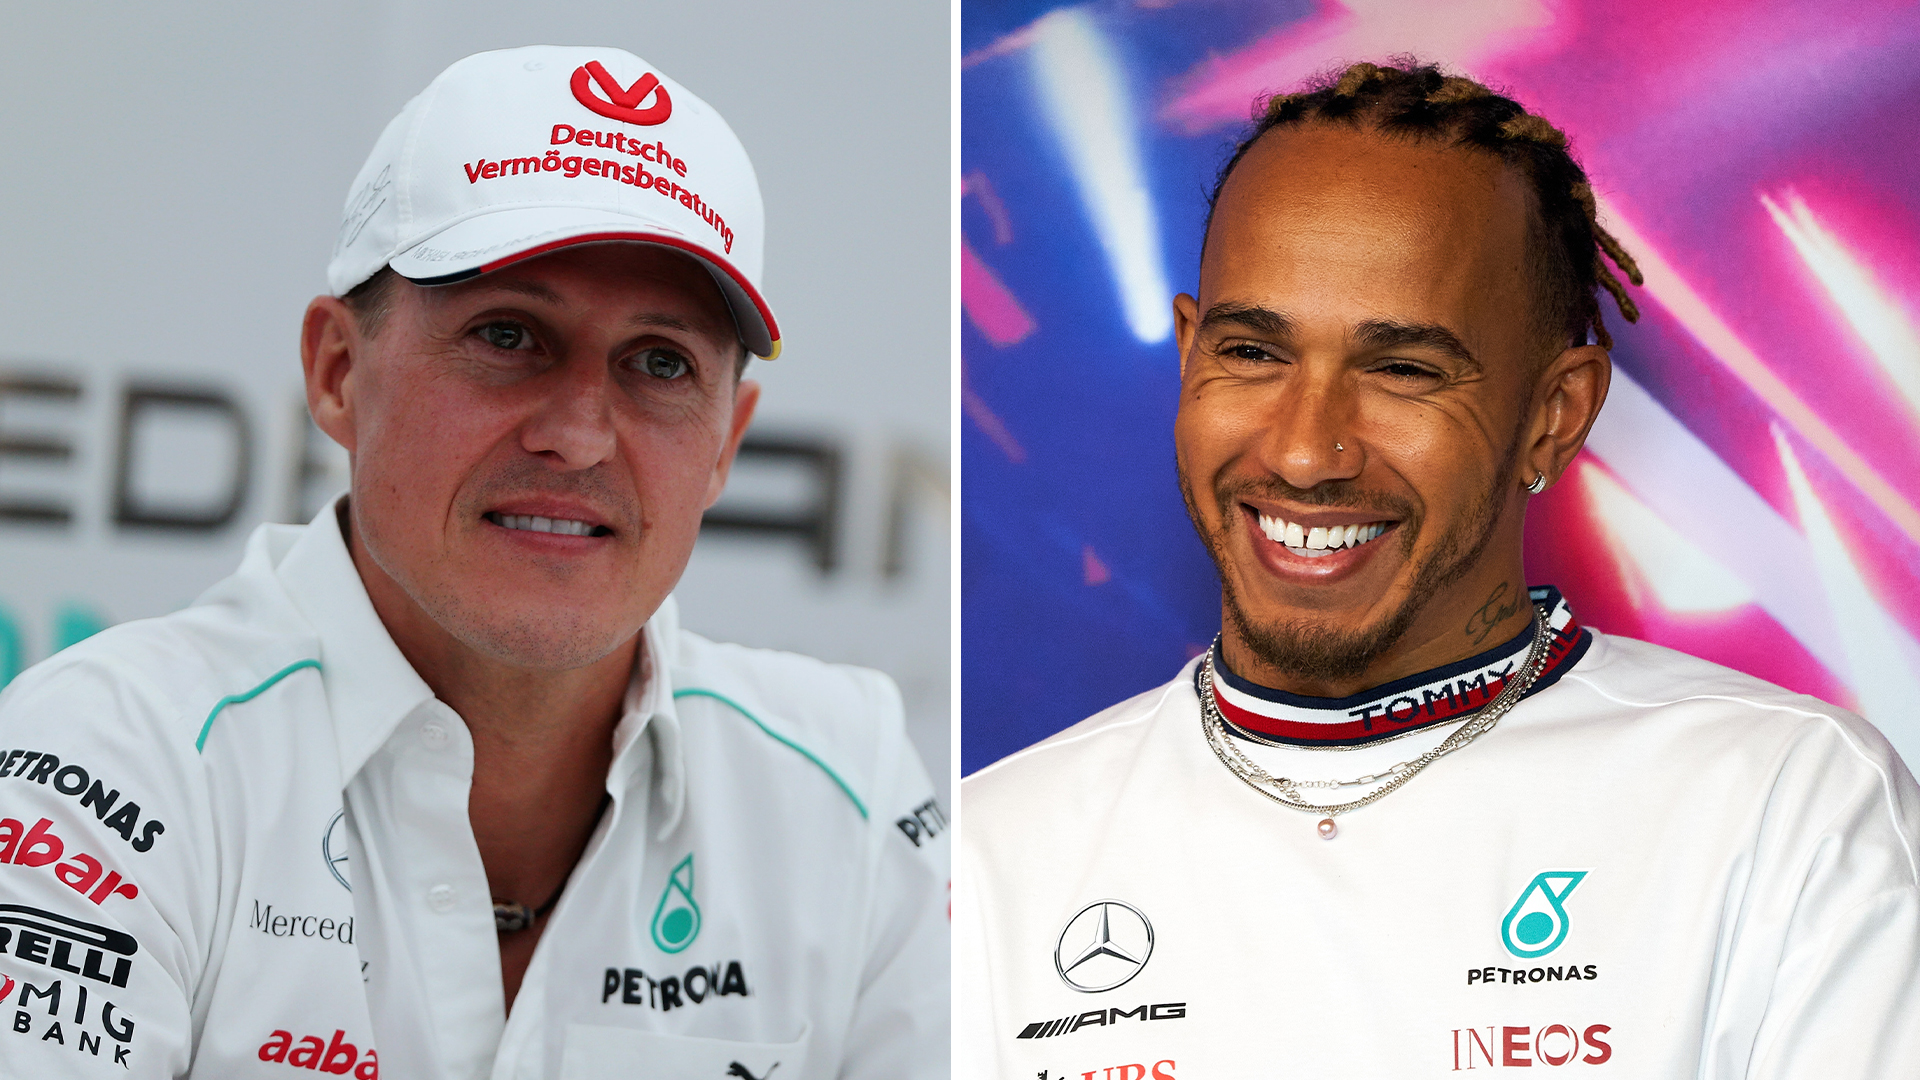 I used to play as Michael Schumacher growing up, joining Ferrari is a boyhood dream, says Lewis Hamilton